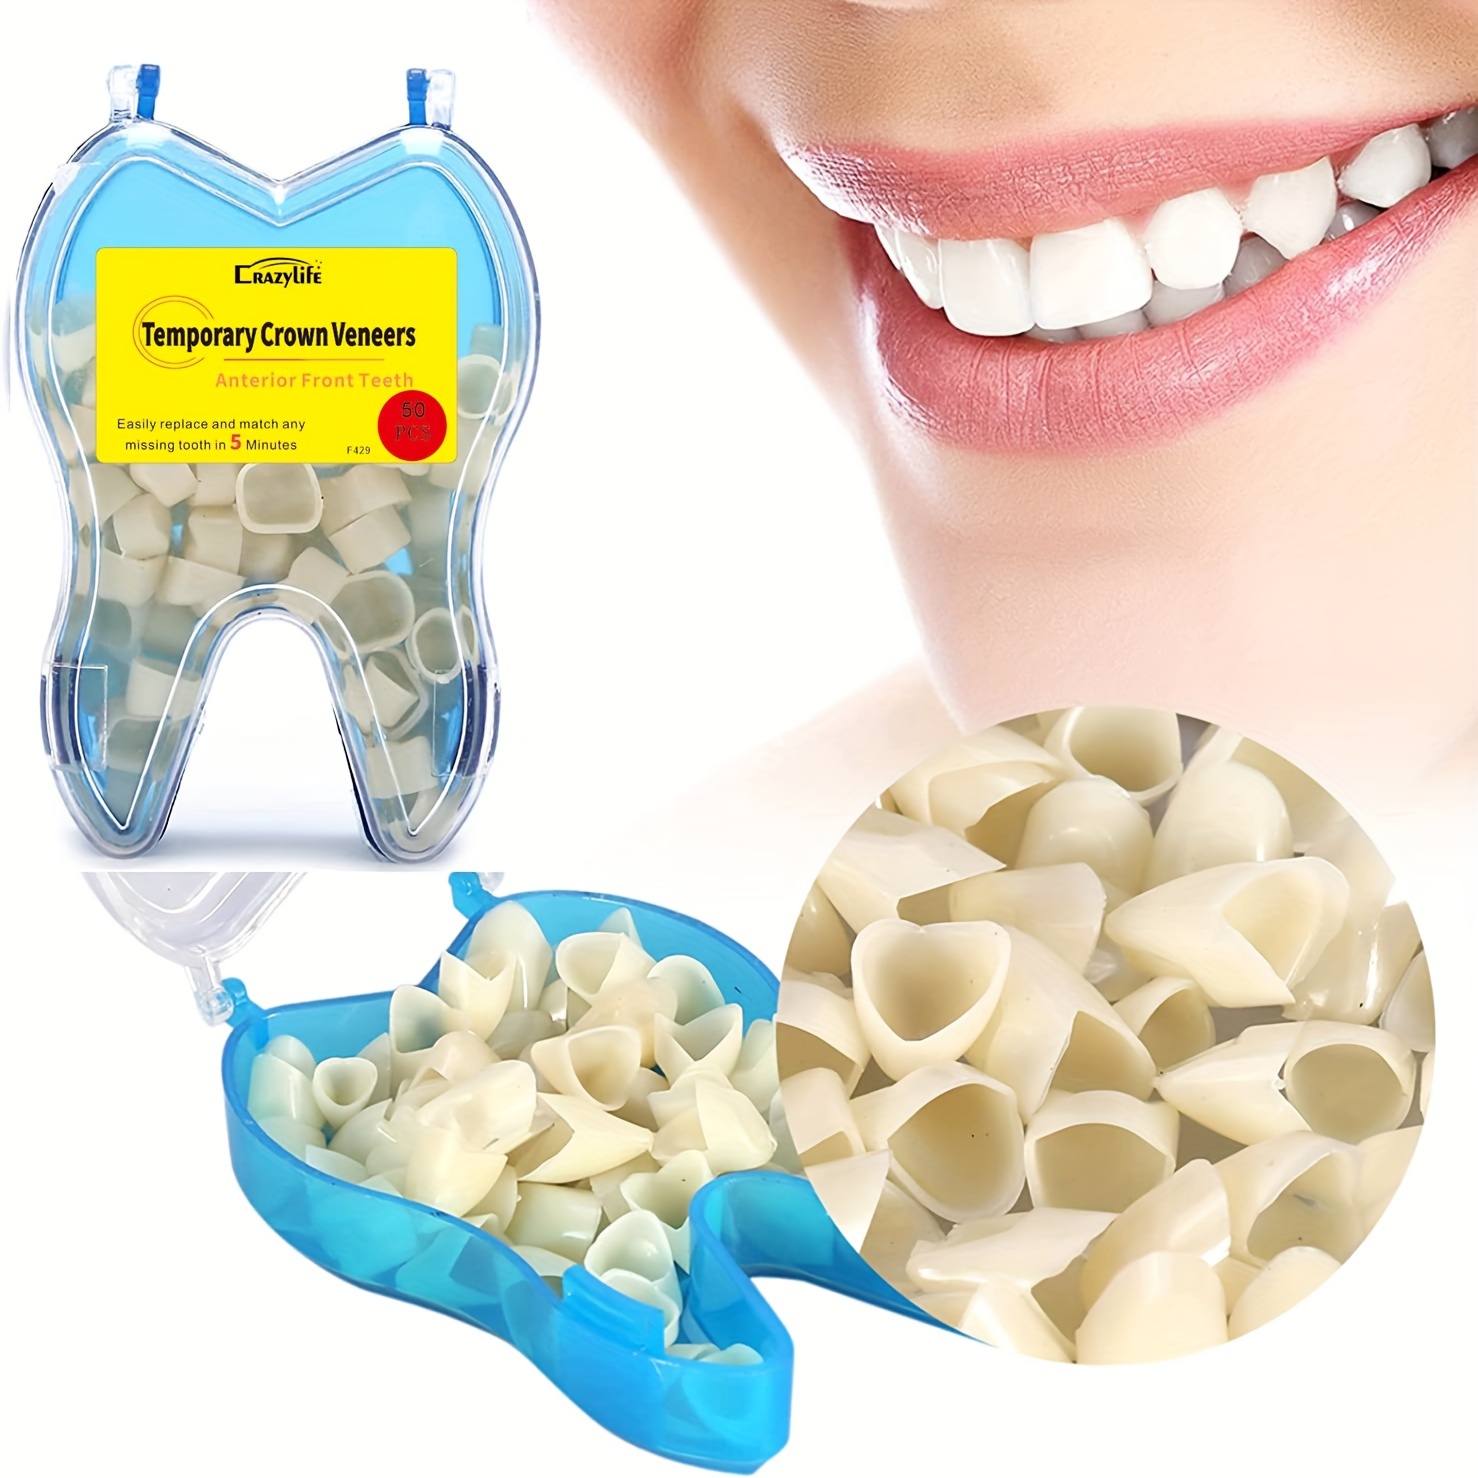 20g Temporary Moldable False Teeth Repair Replacement Thermal Fitting Beads  for Teeth Instant Confident Smile Teeth (Normal White)